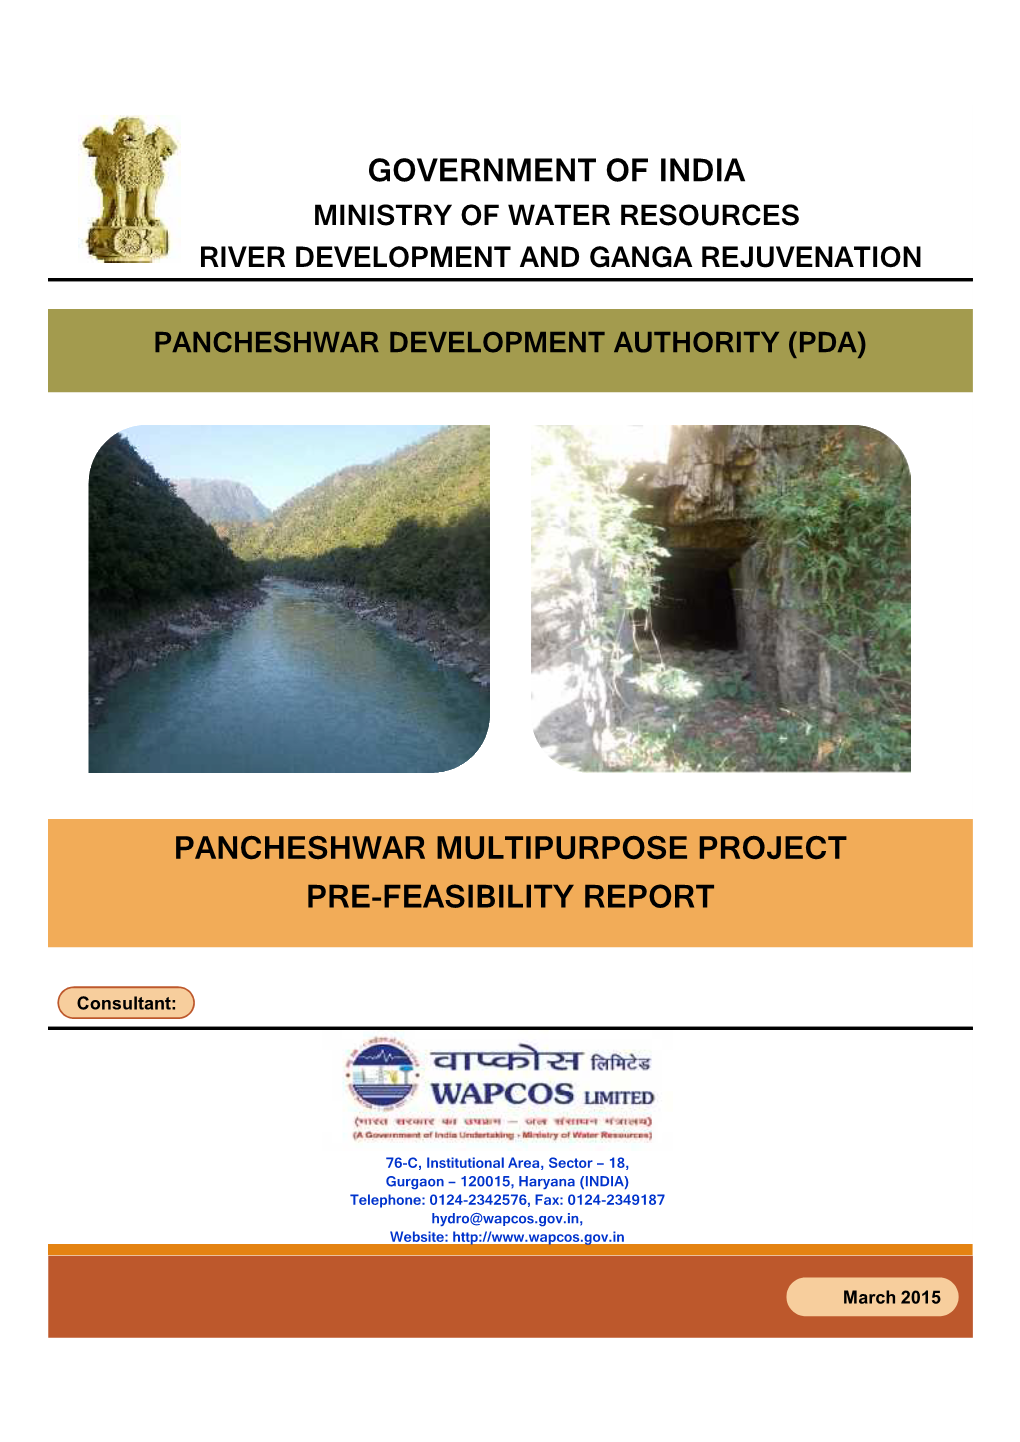 Government of India Pancheshwar Multipurpose Project Pre-Feasibility Report